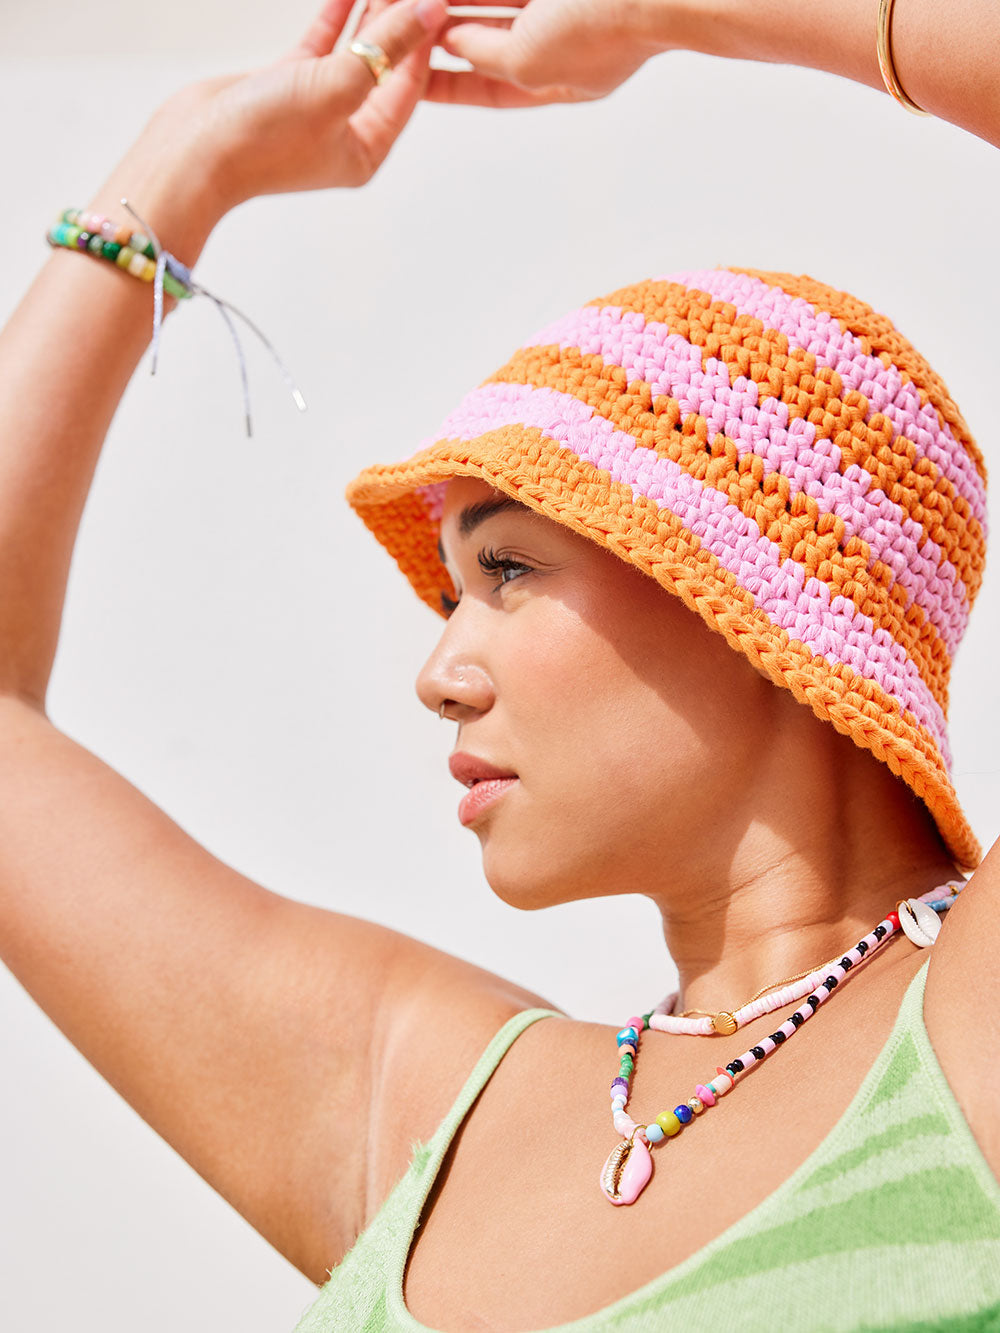 Learn to Crochet the Sunny Bucket Hat with Cardigang